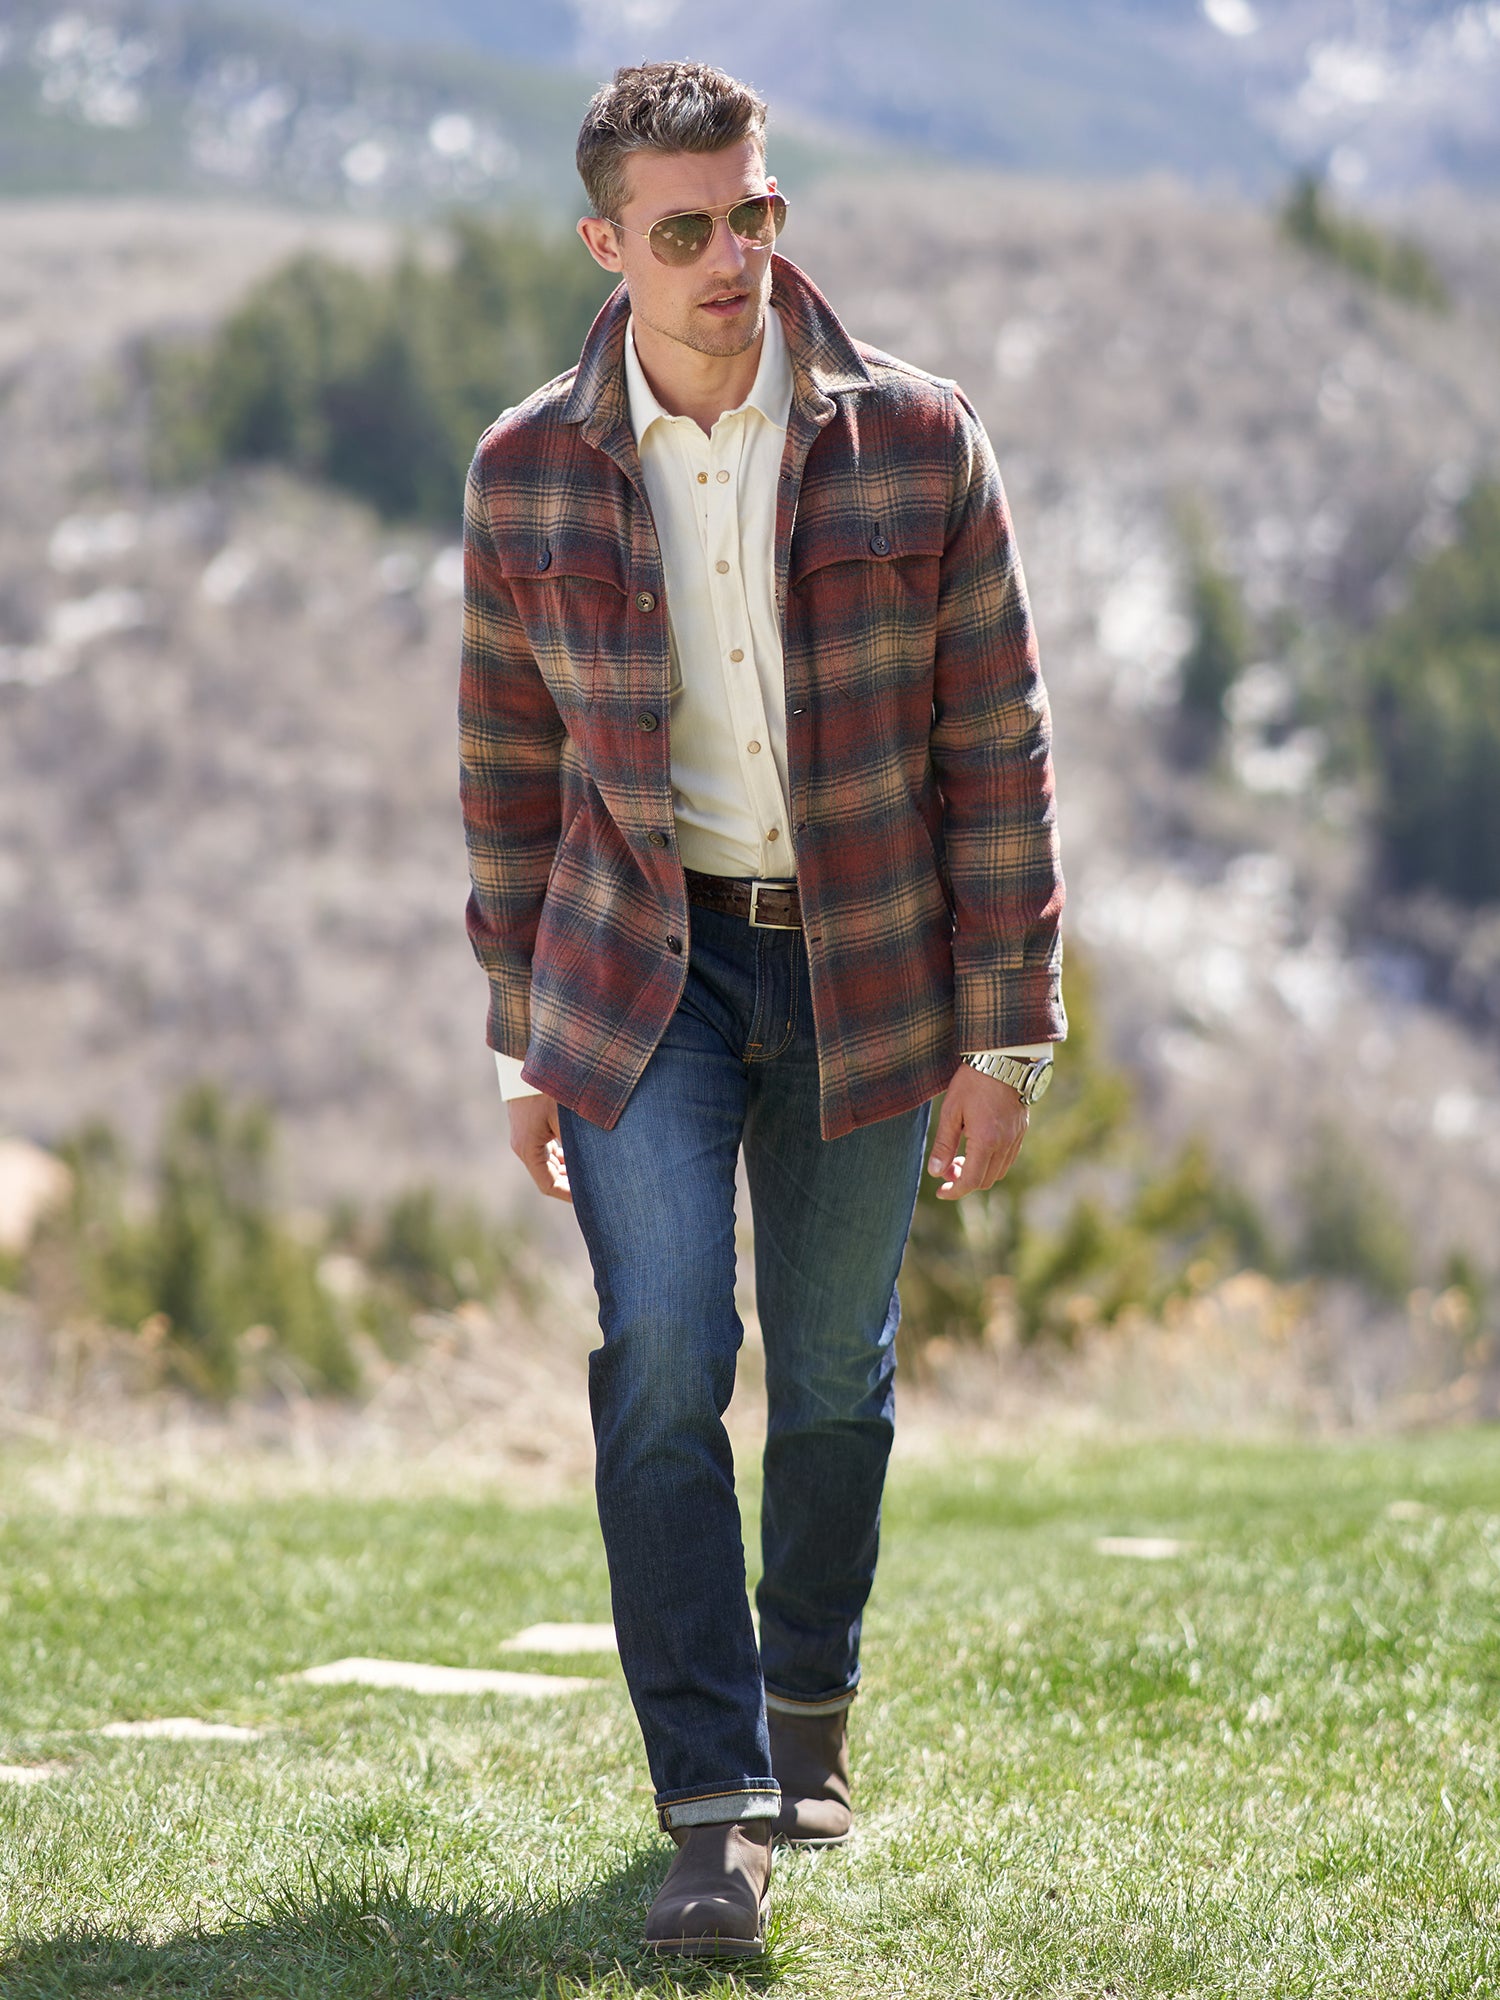 Flannel Jacket Outfit Ideas  Men Flannel Jackets Men Outfiters 